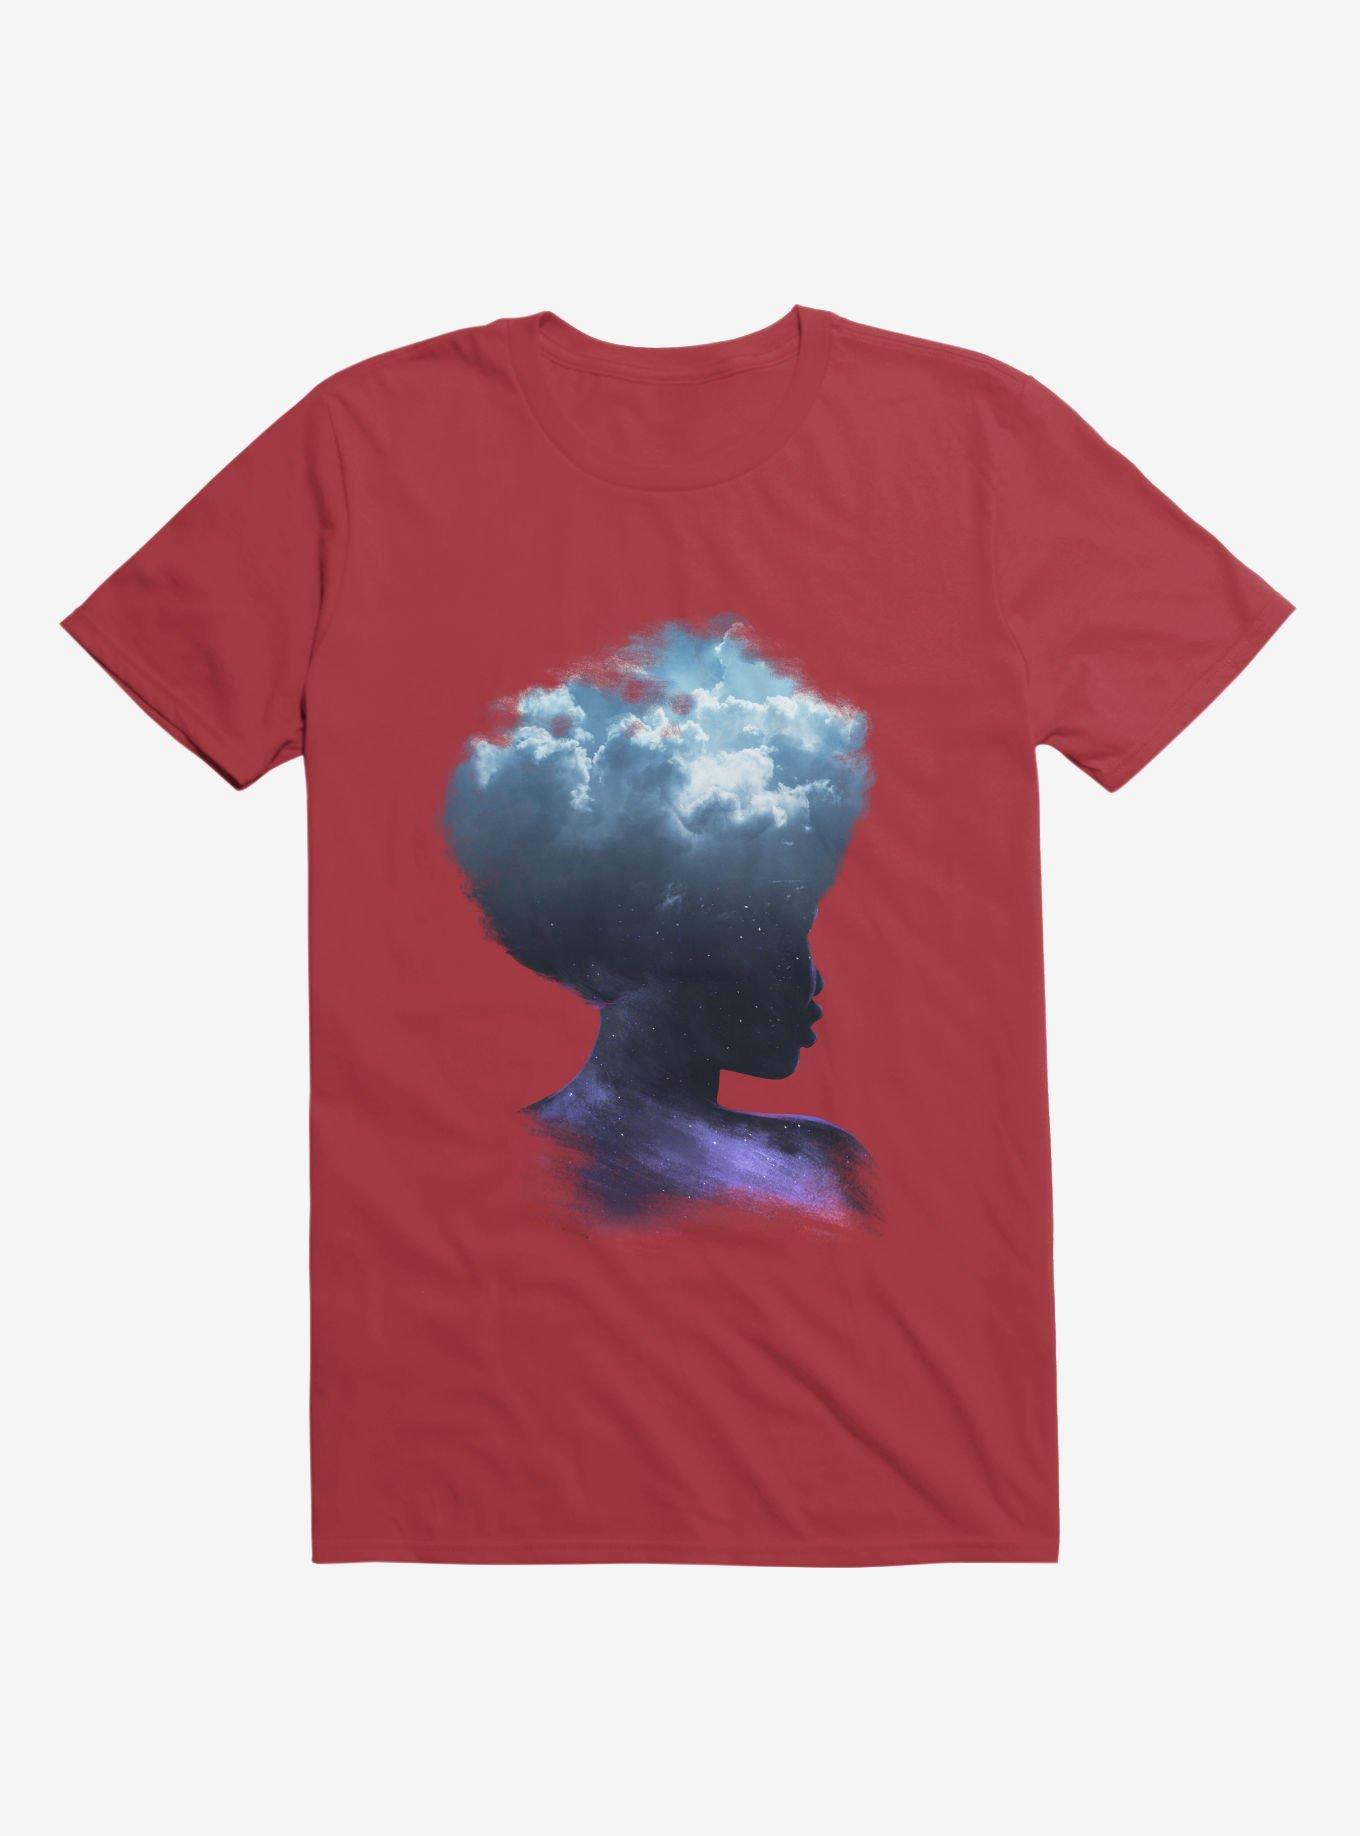 Head In The Clouds Galaxy Red T-Shirt, RED, hi-res